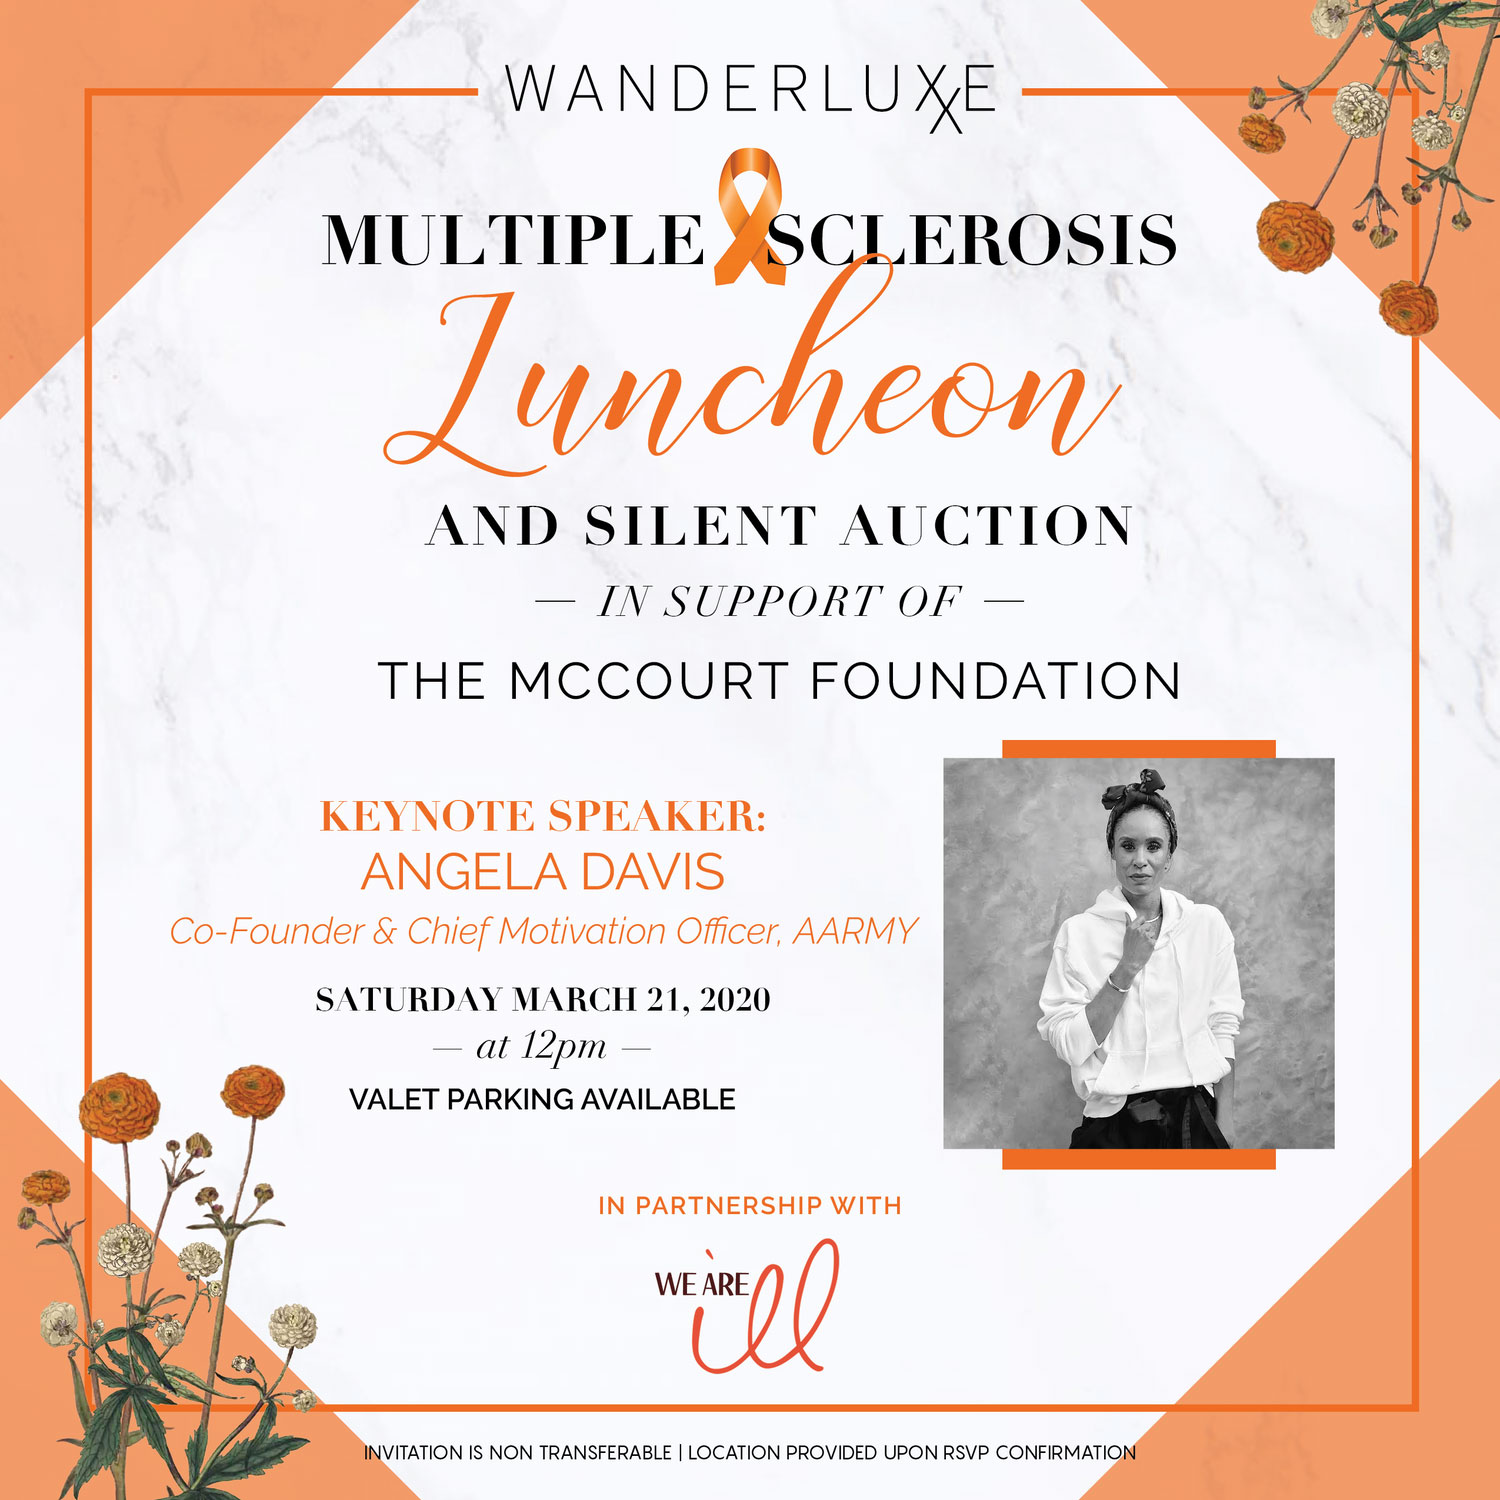 Multiple Sclerosis Luncheon and Silent Auction info